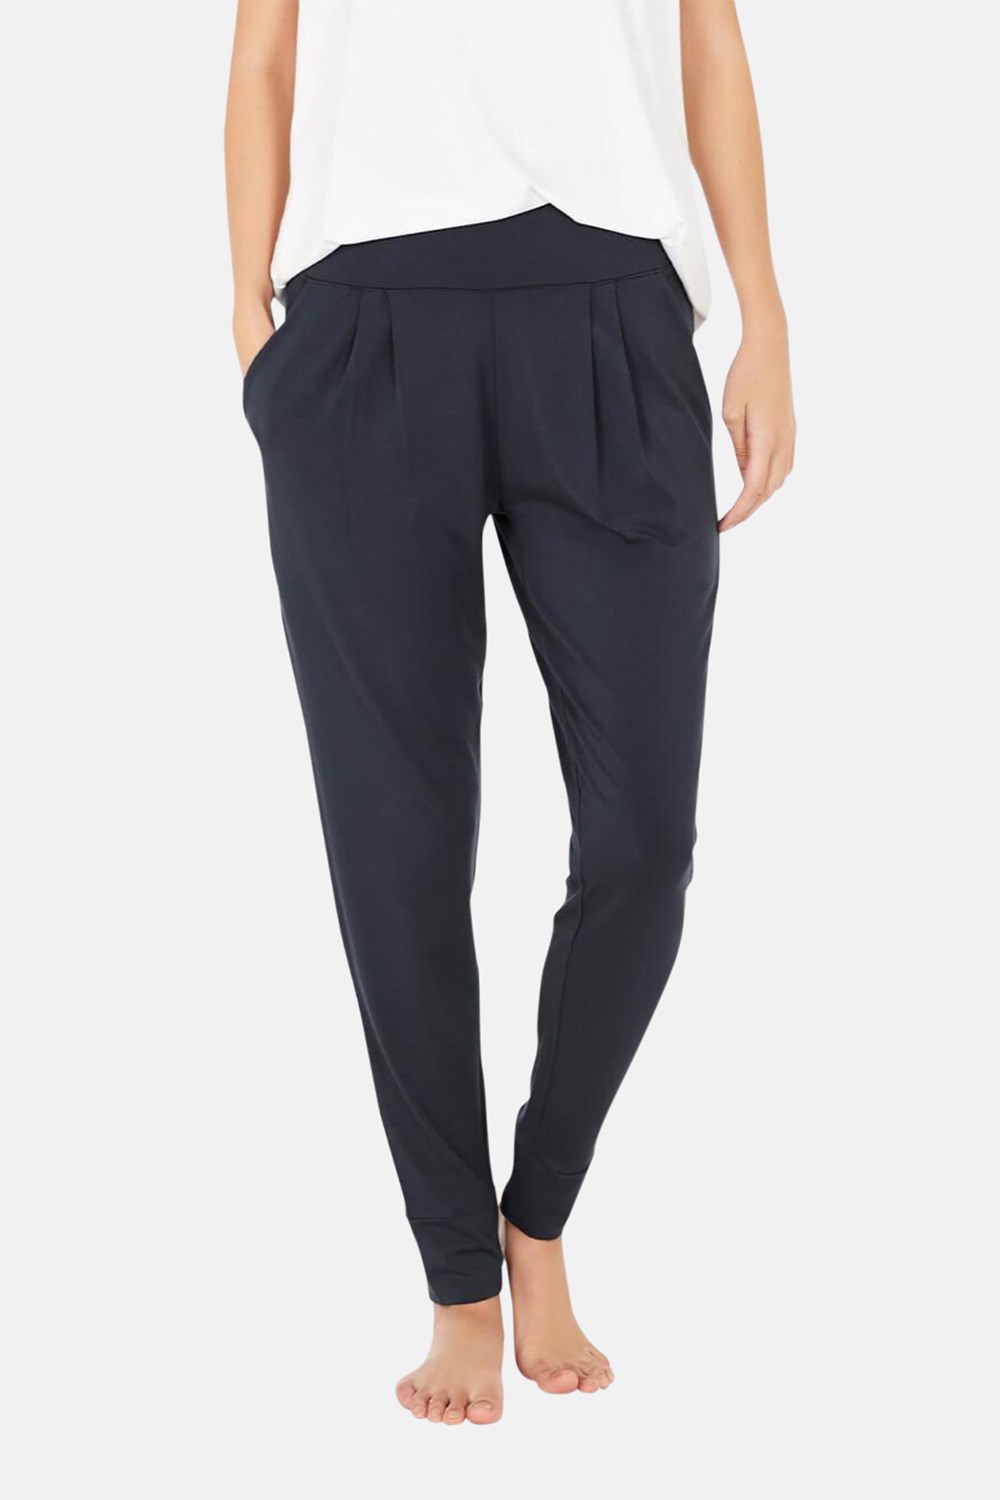 Downtime Womens Bamboo Lounge Pants -